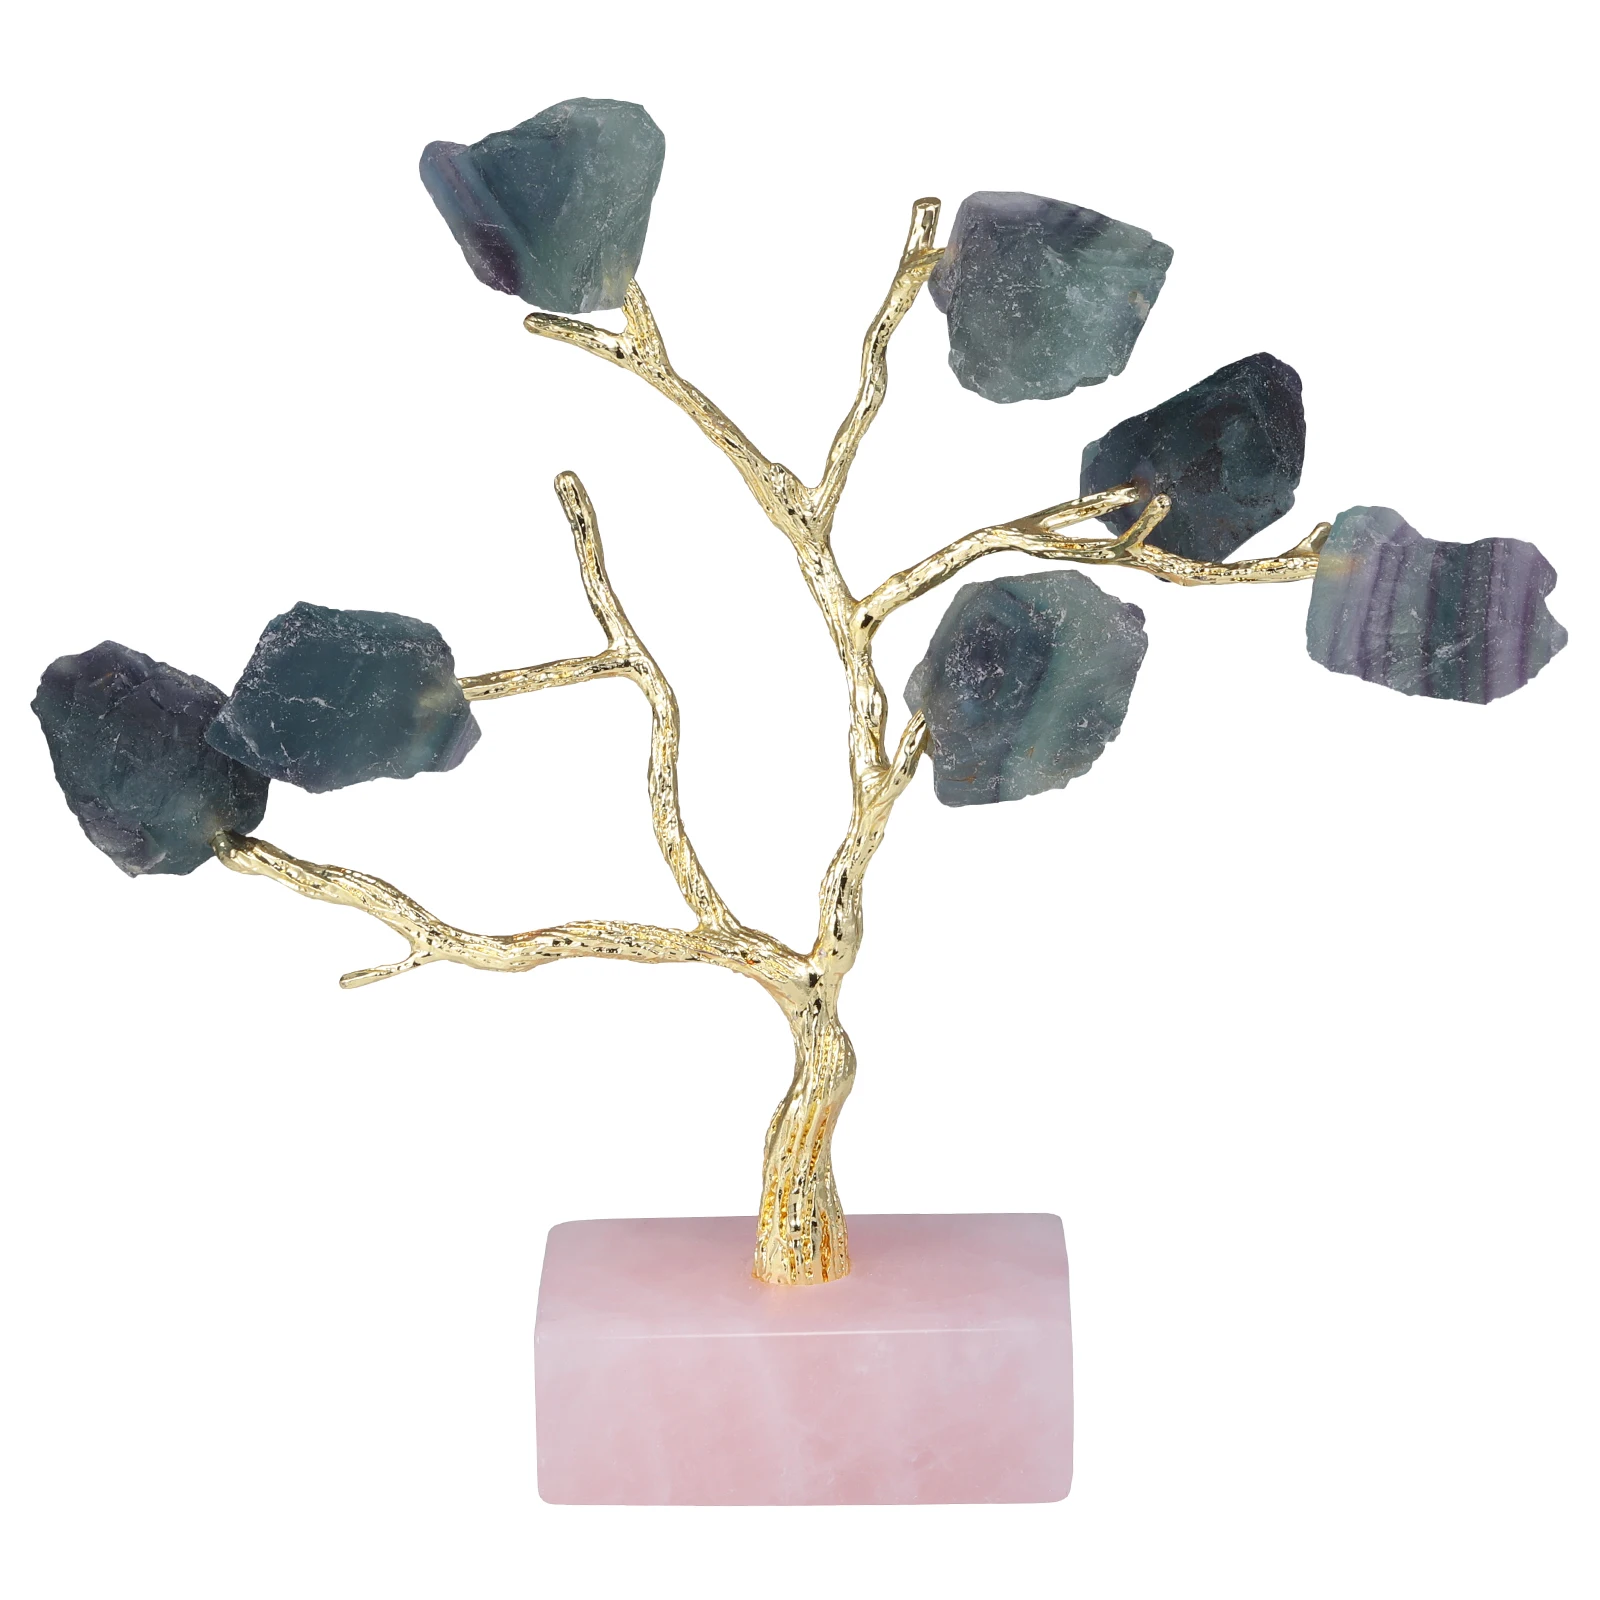 Natural Rough Crystal Stone Tree With Rose Quartz Base Healing Gemstone Golden Tree For Jewelry Organizer Home Table Decoration tumbeelluwa natural rough amethyst base luck money tree reiki healing crystal chips gravel minerals home decoration diy gift